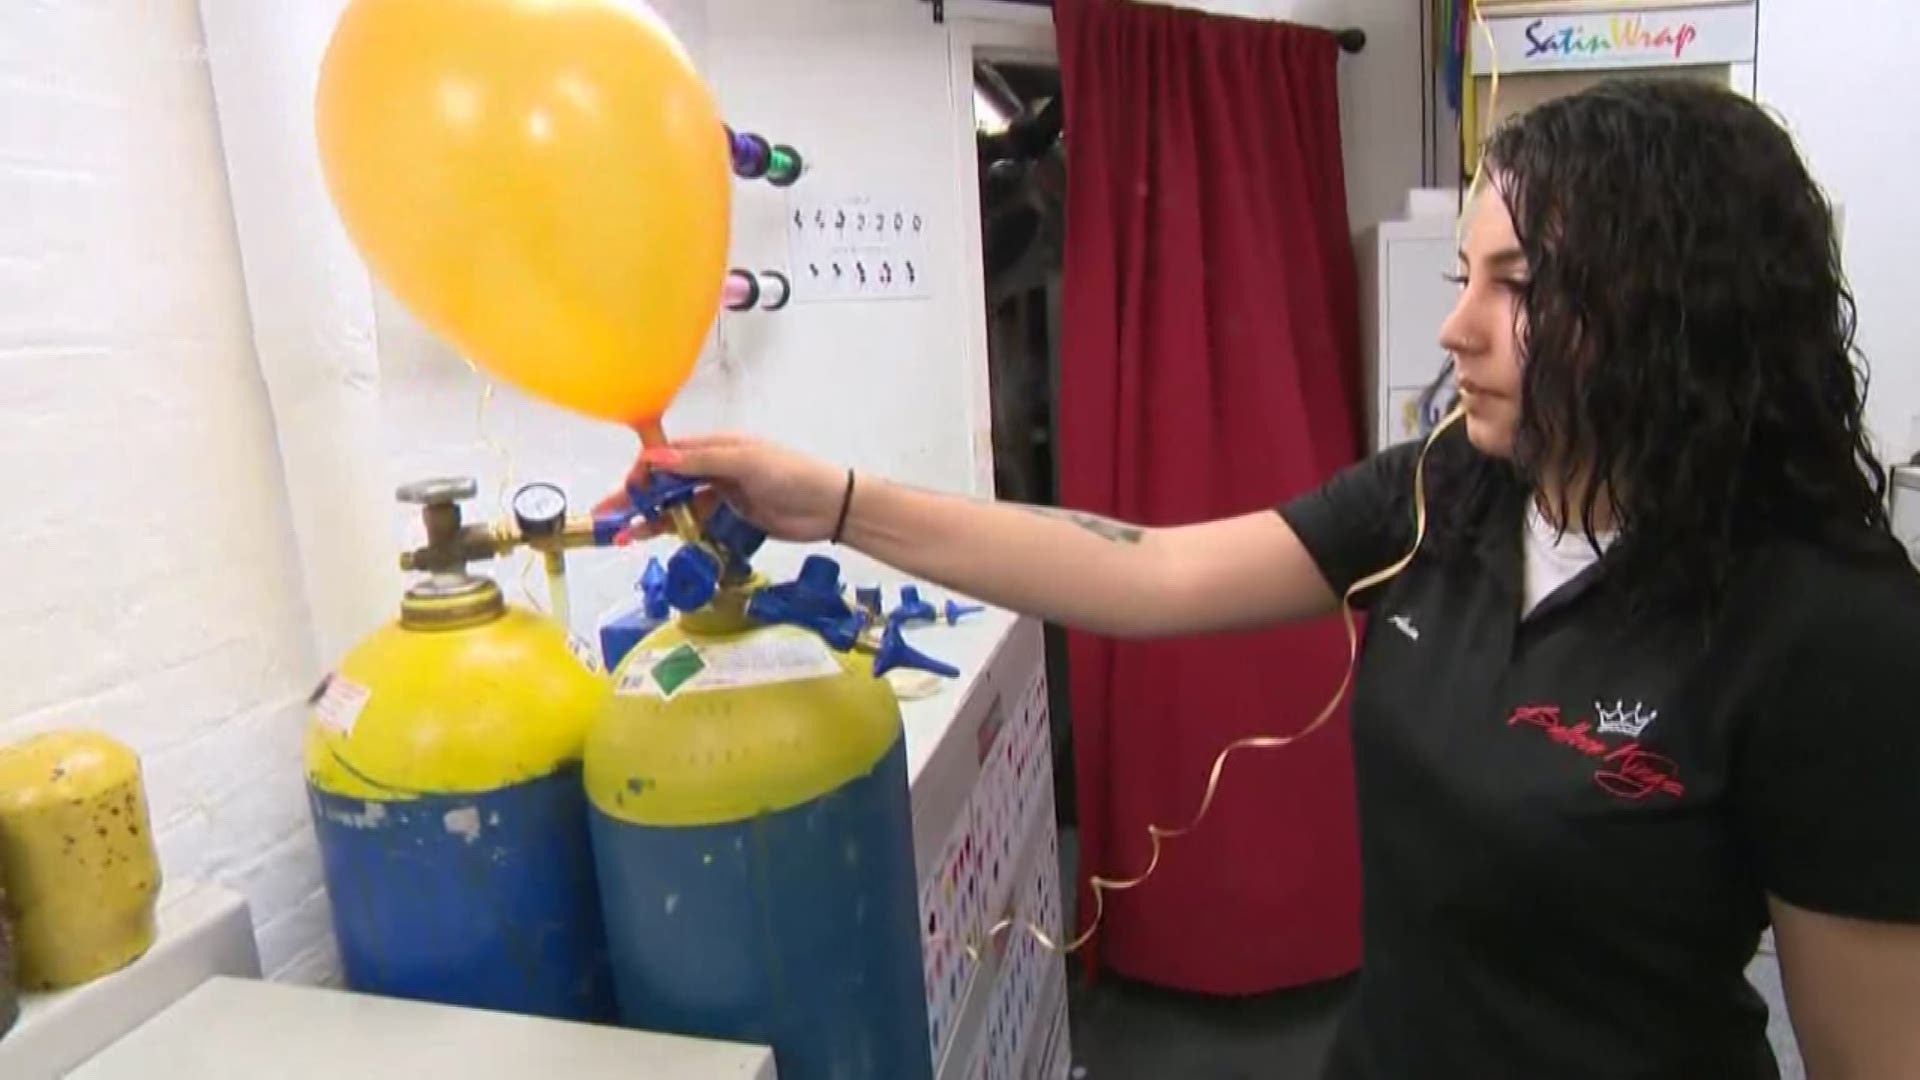 Is there really a helium shortage?